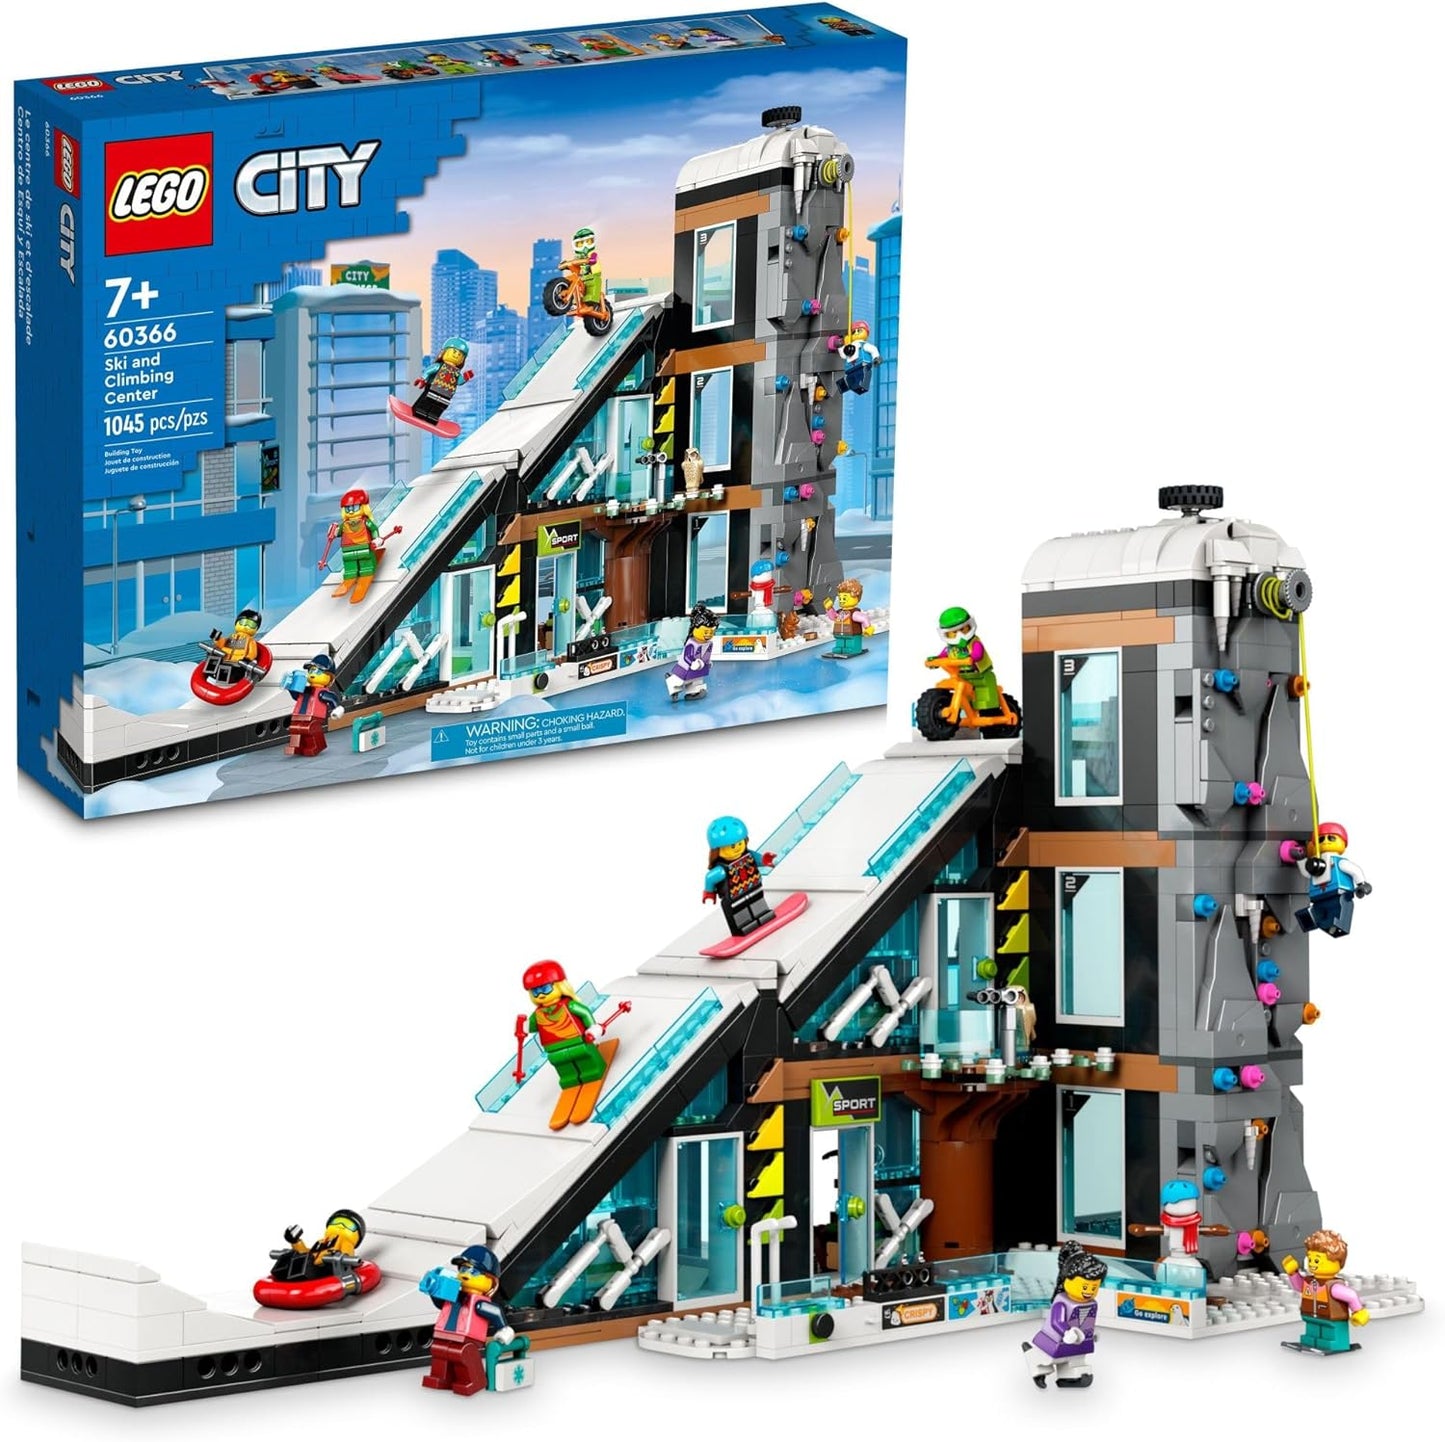 LEGO City Ski and Climbing Center Building Set, 1045 Pieces, for Kids Ages 7 and Up